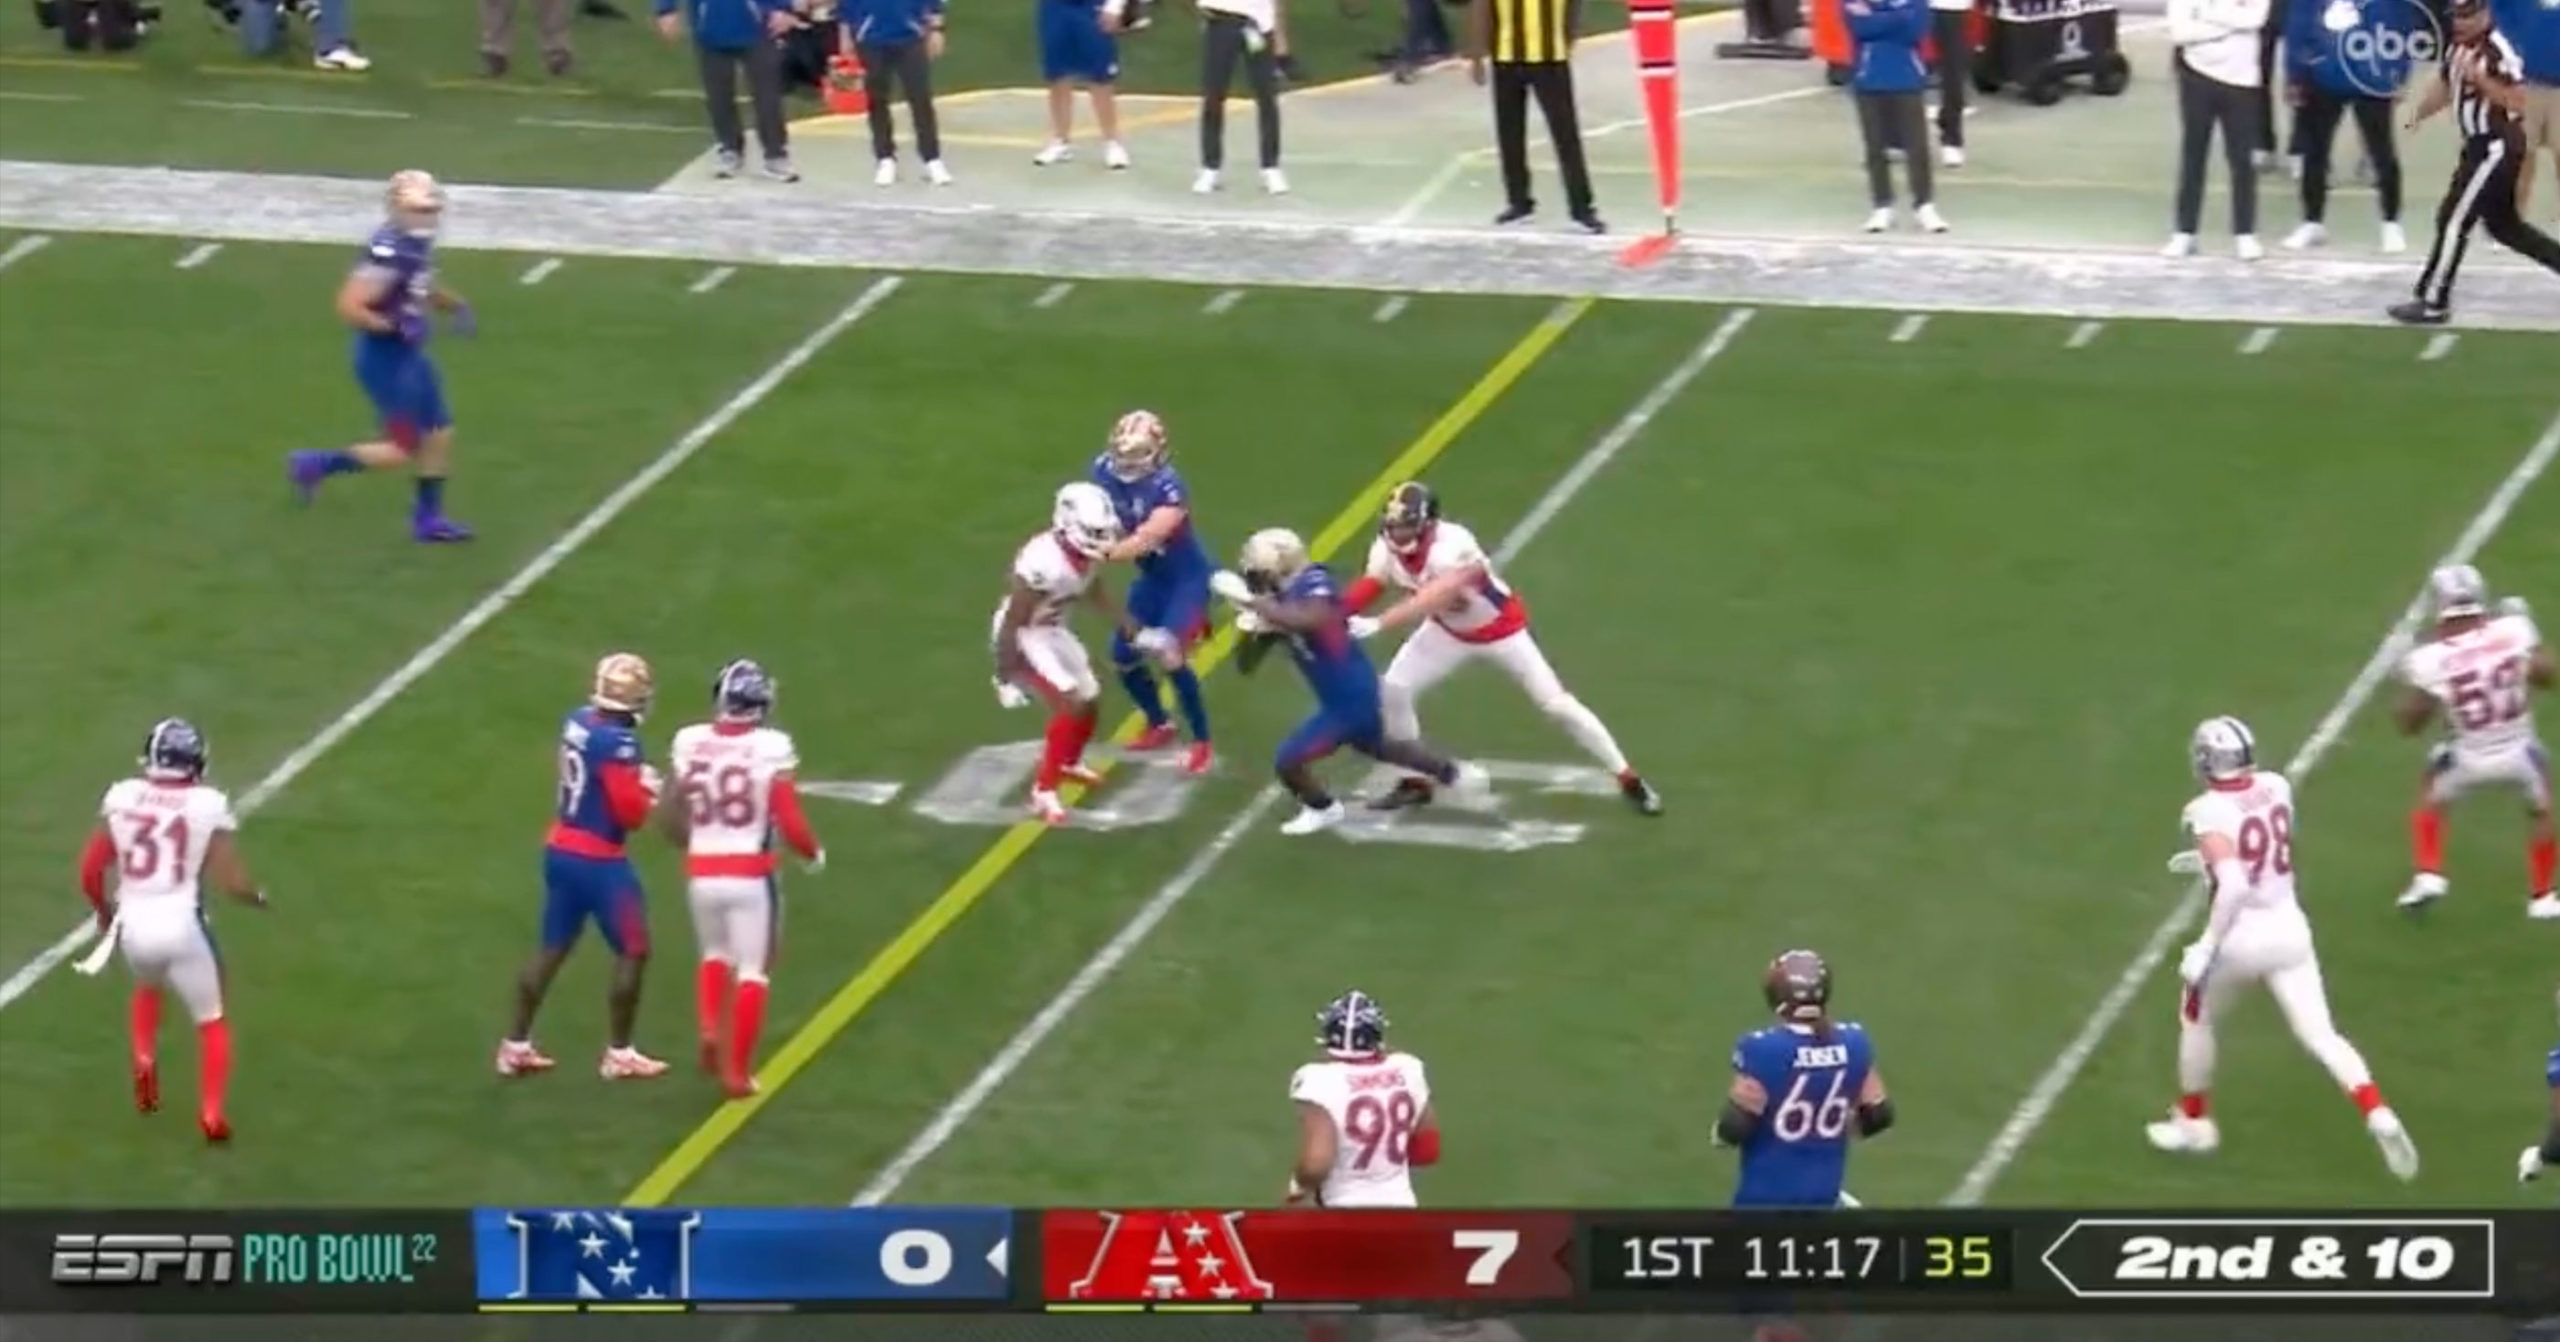 They're Officially Playing Two-Hand Touch At The NFL Pro Bowl (VIDEO)